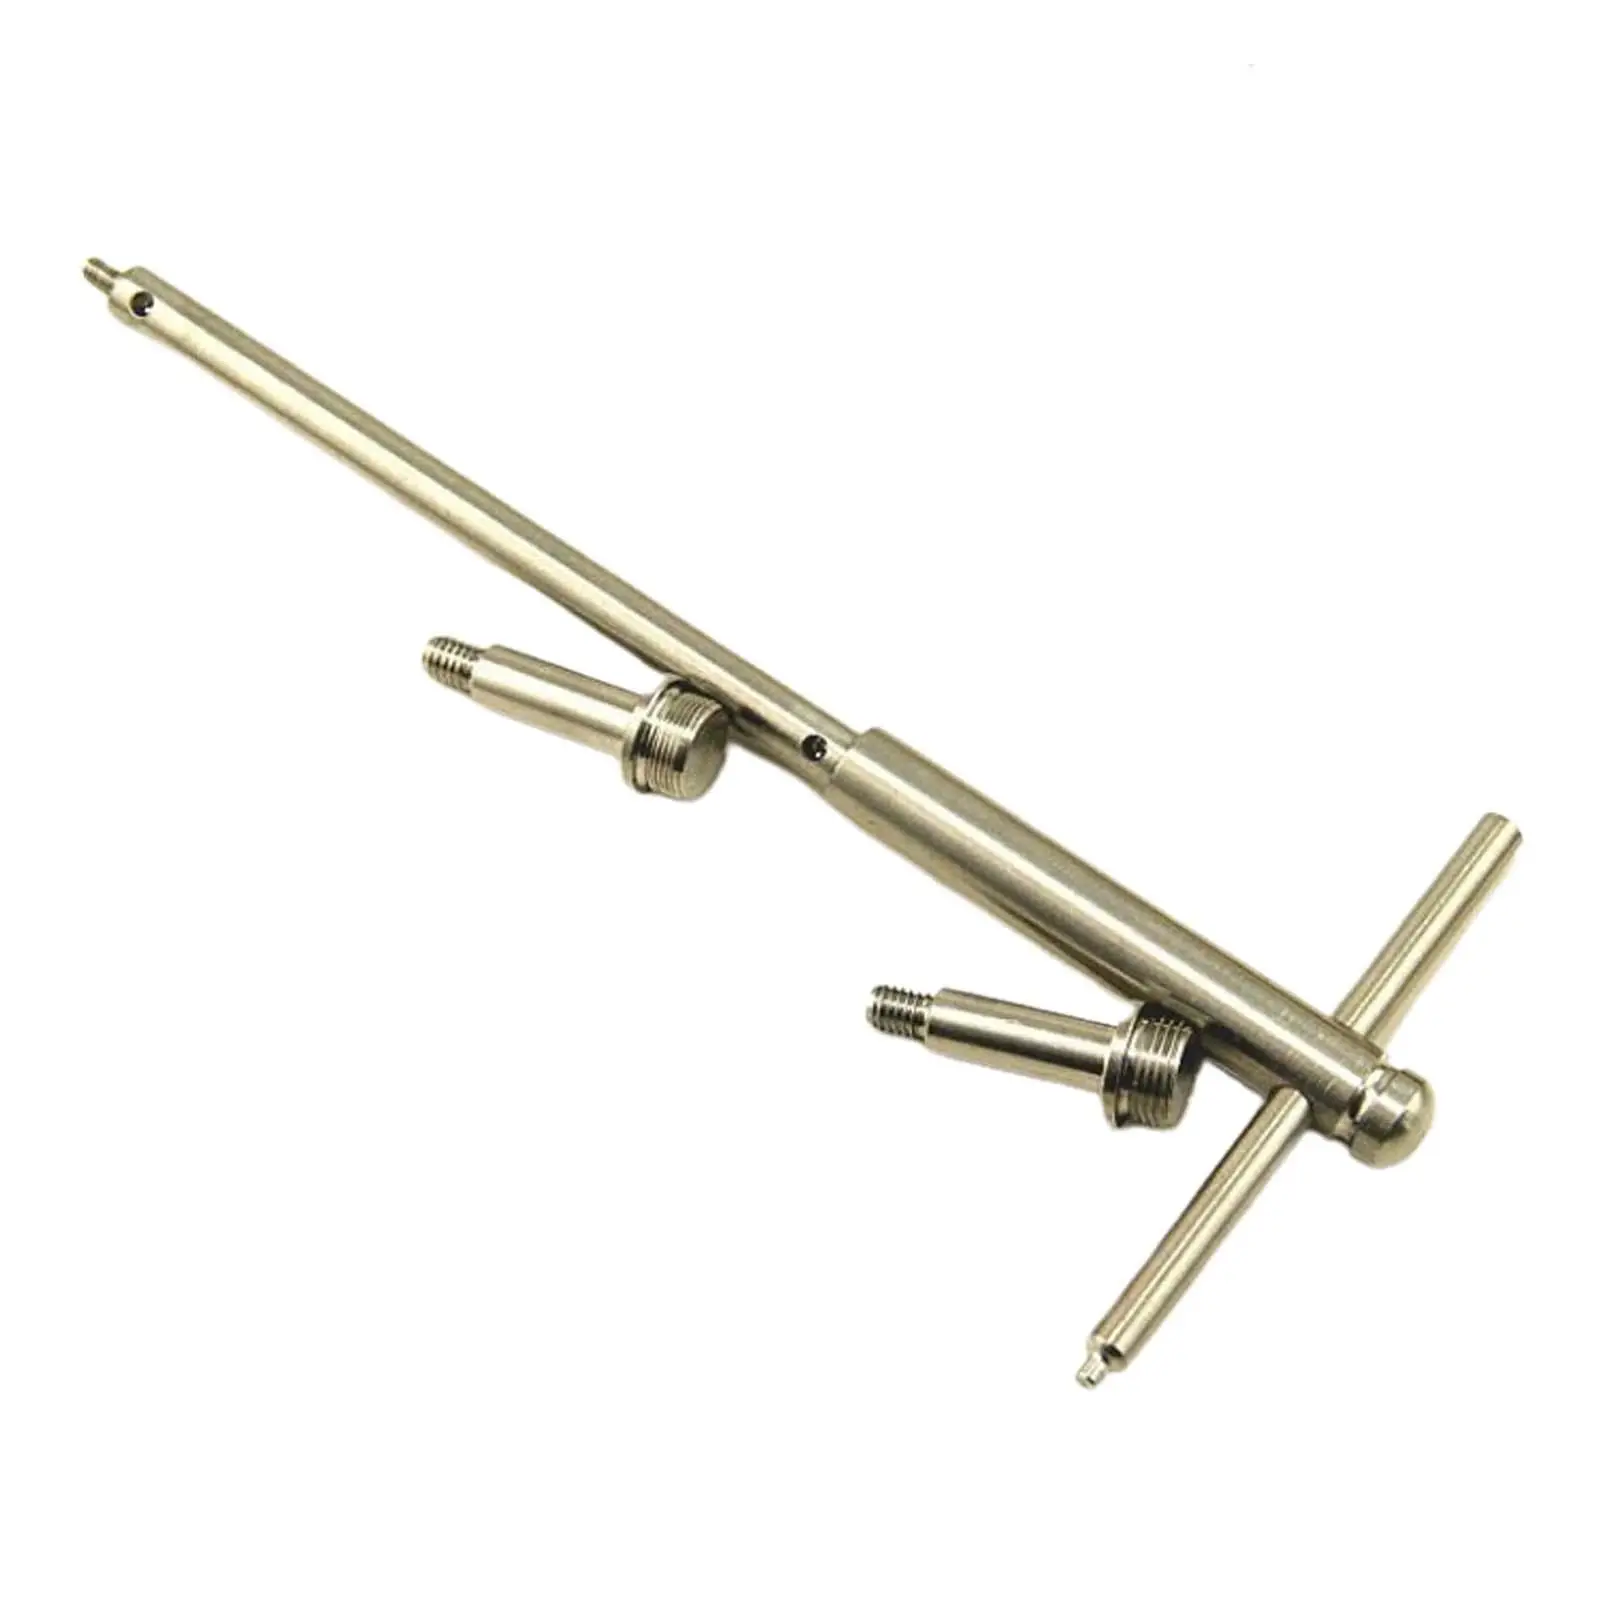 Instrument Accessories Trumpet Part, Trumpet Piston Grinding Auxiliary Tools,